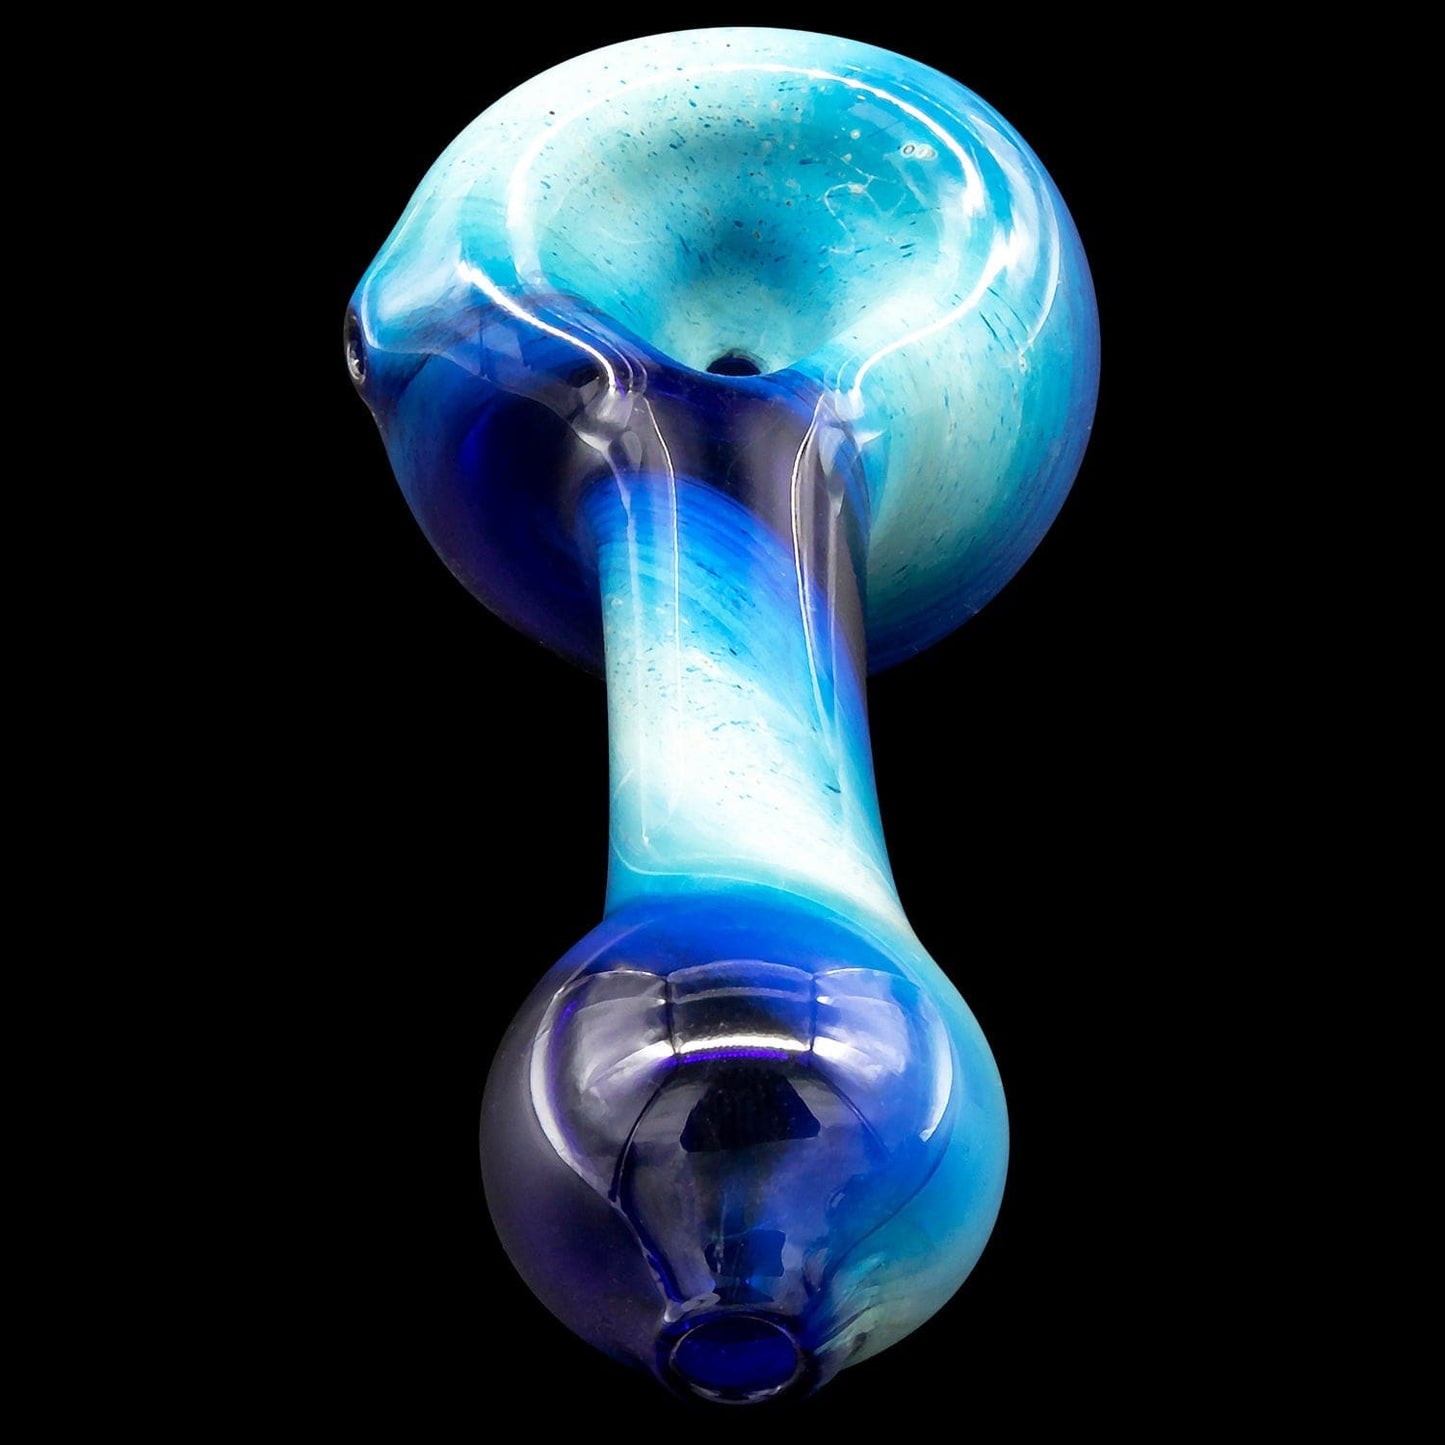 LA Pipes Hand Pipe "Galaxy" Fumed Spoon Pipe